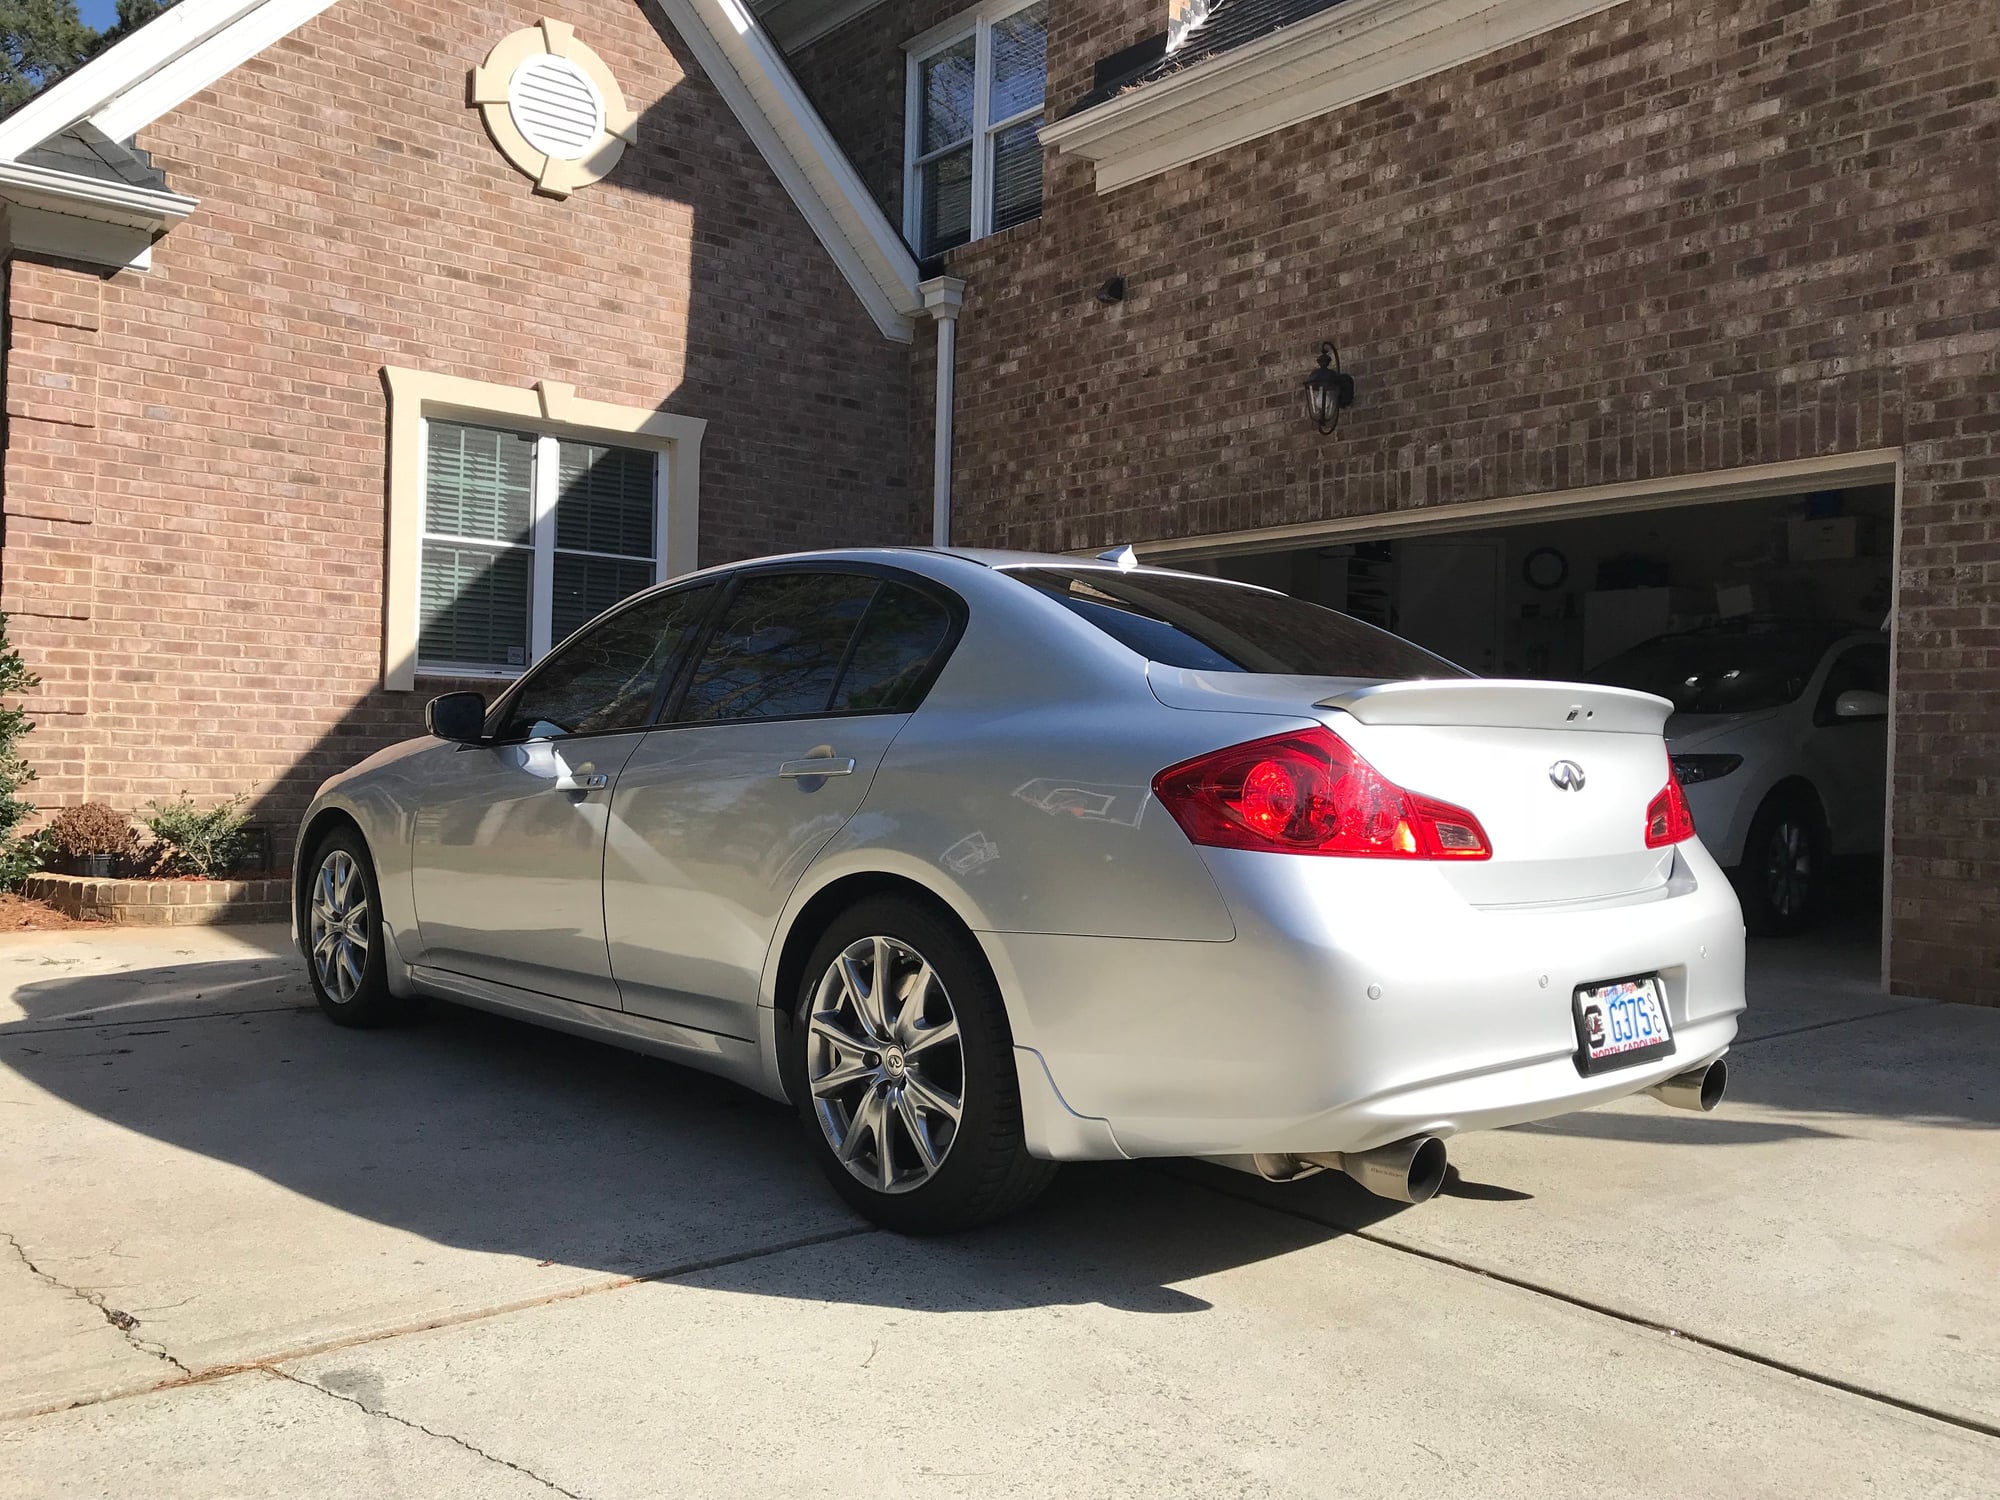 For Sale 2011 infiniti g37s part out (obo) - MyG37